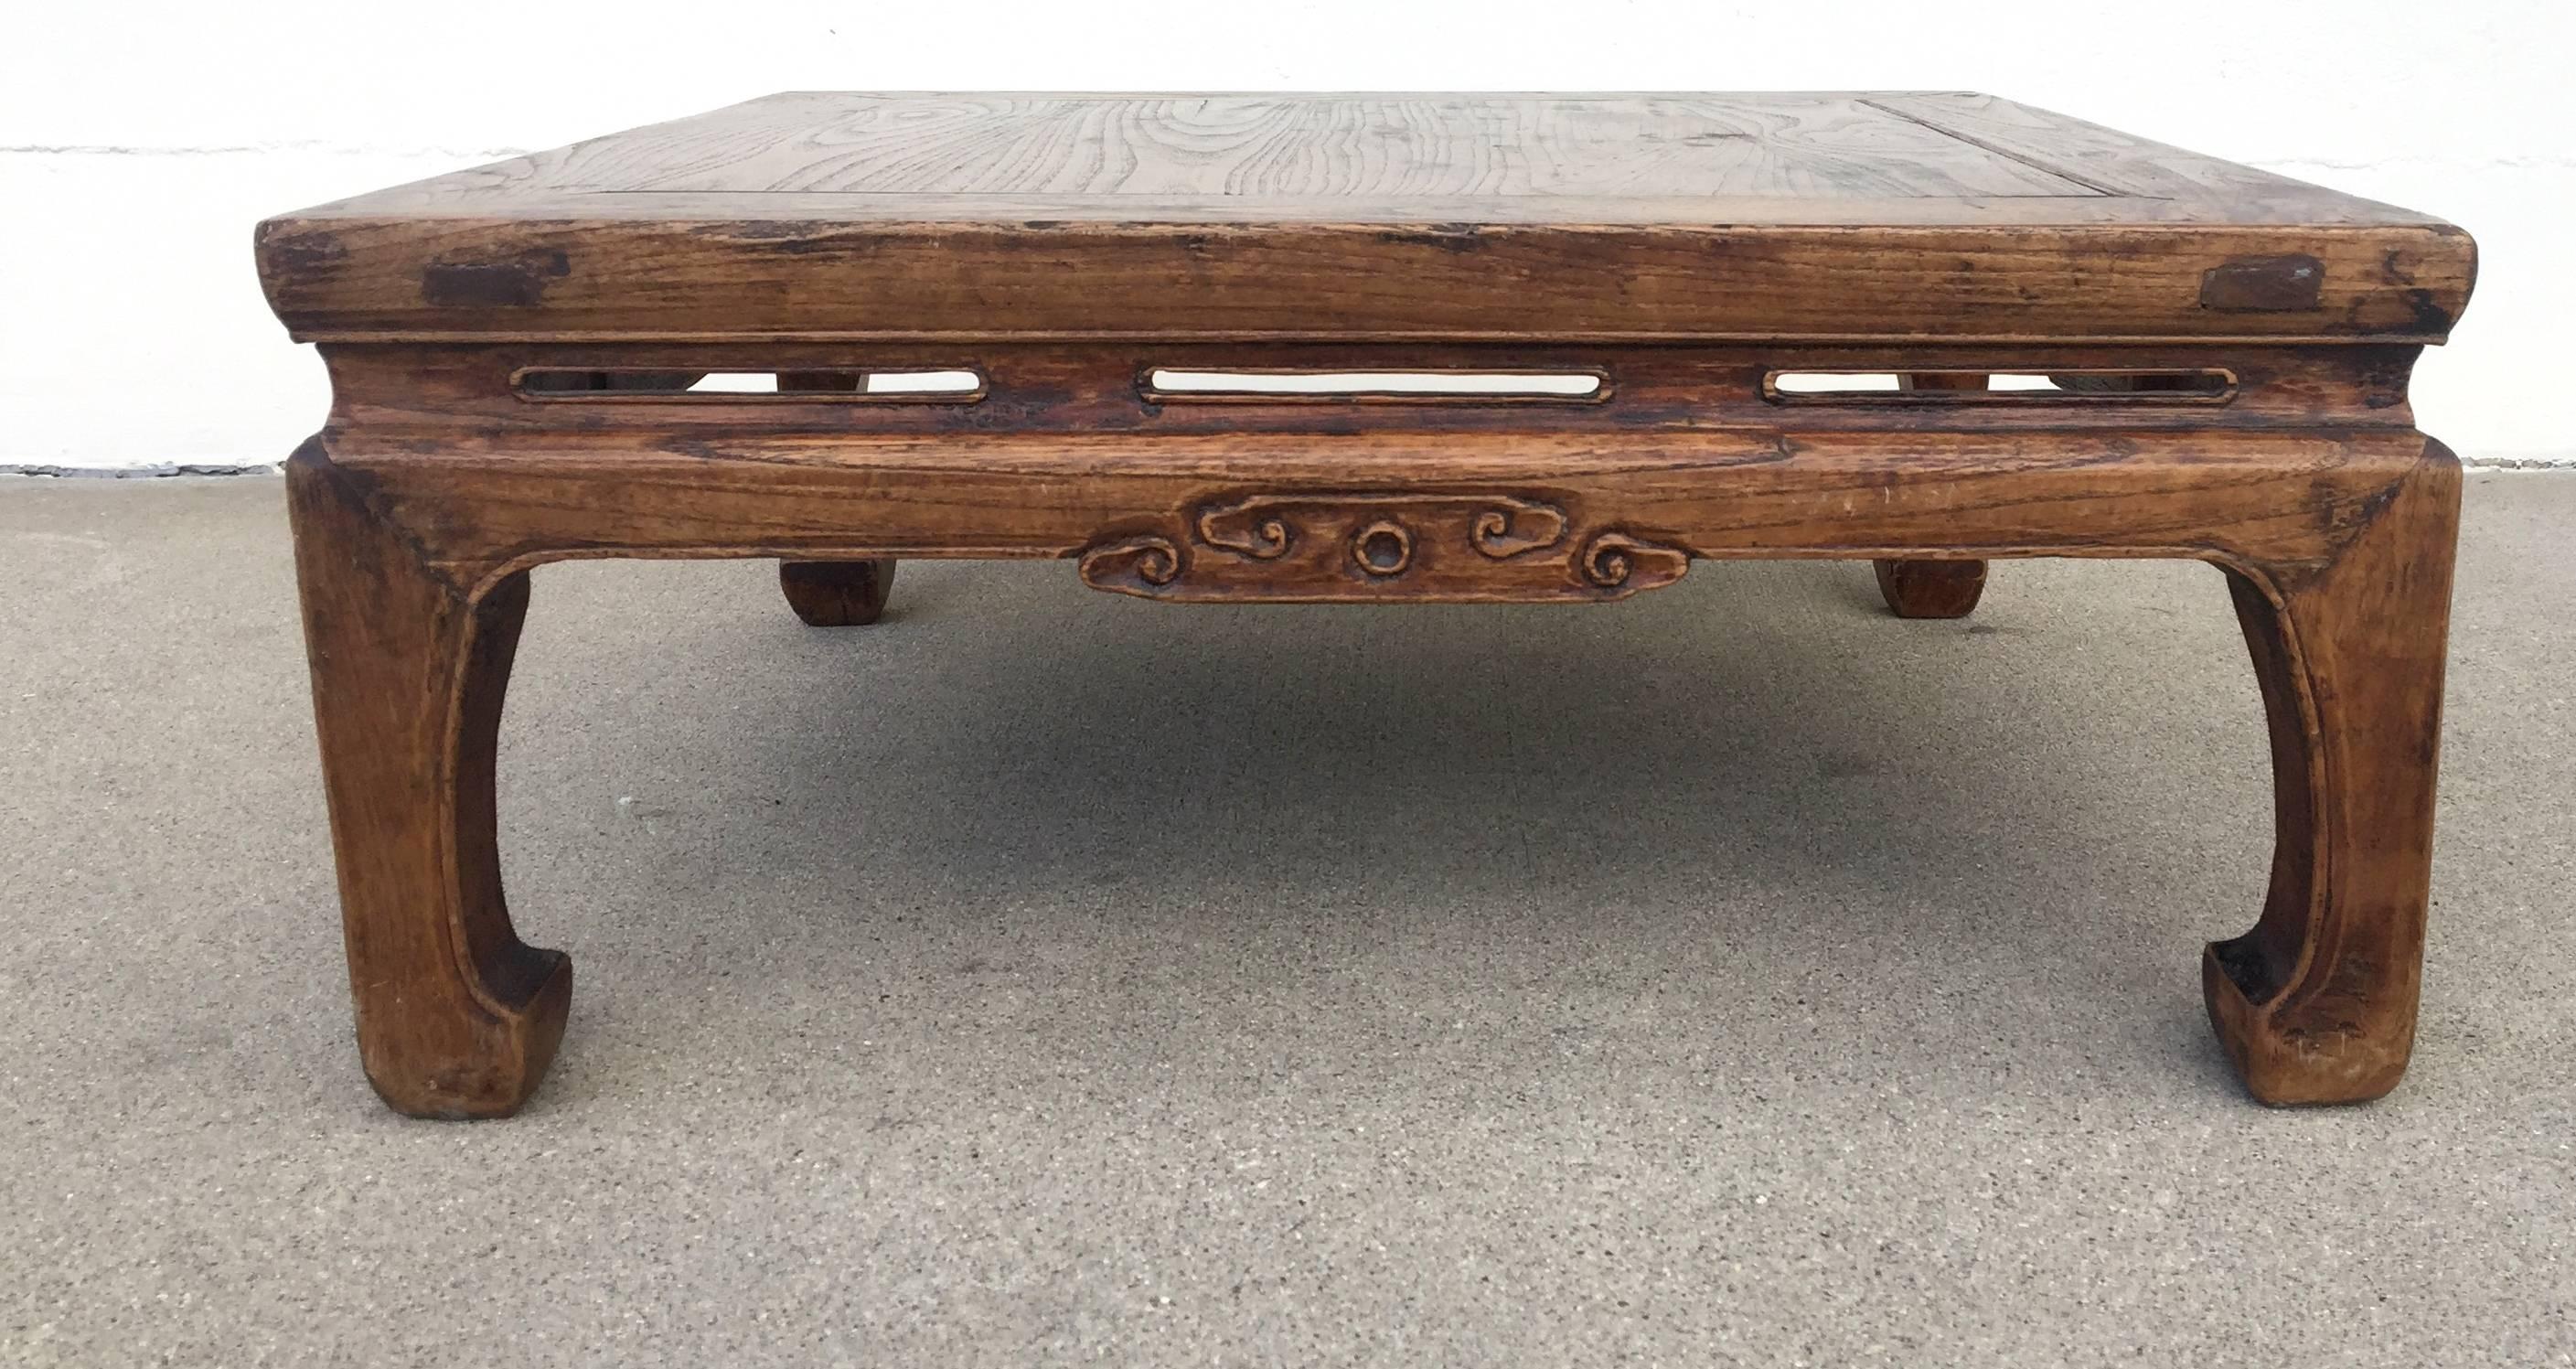 Beautiful 19th century Chinese table in solidwood. Such a piece is used in northern China on a structure called "Kang", a platform brick bed that is heated from underneath. In the extreme northern winters, kang, is the place where most